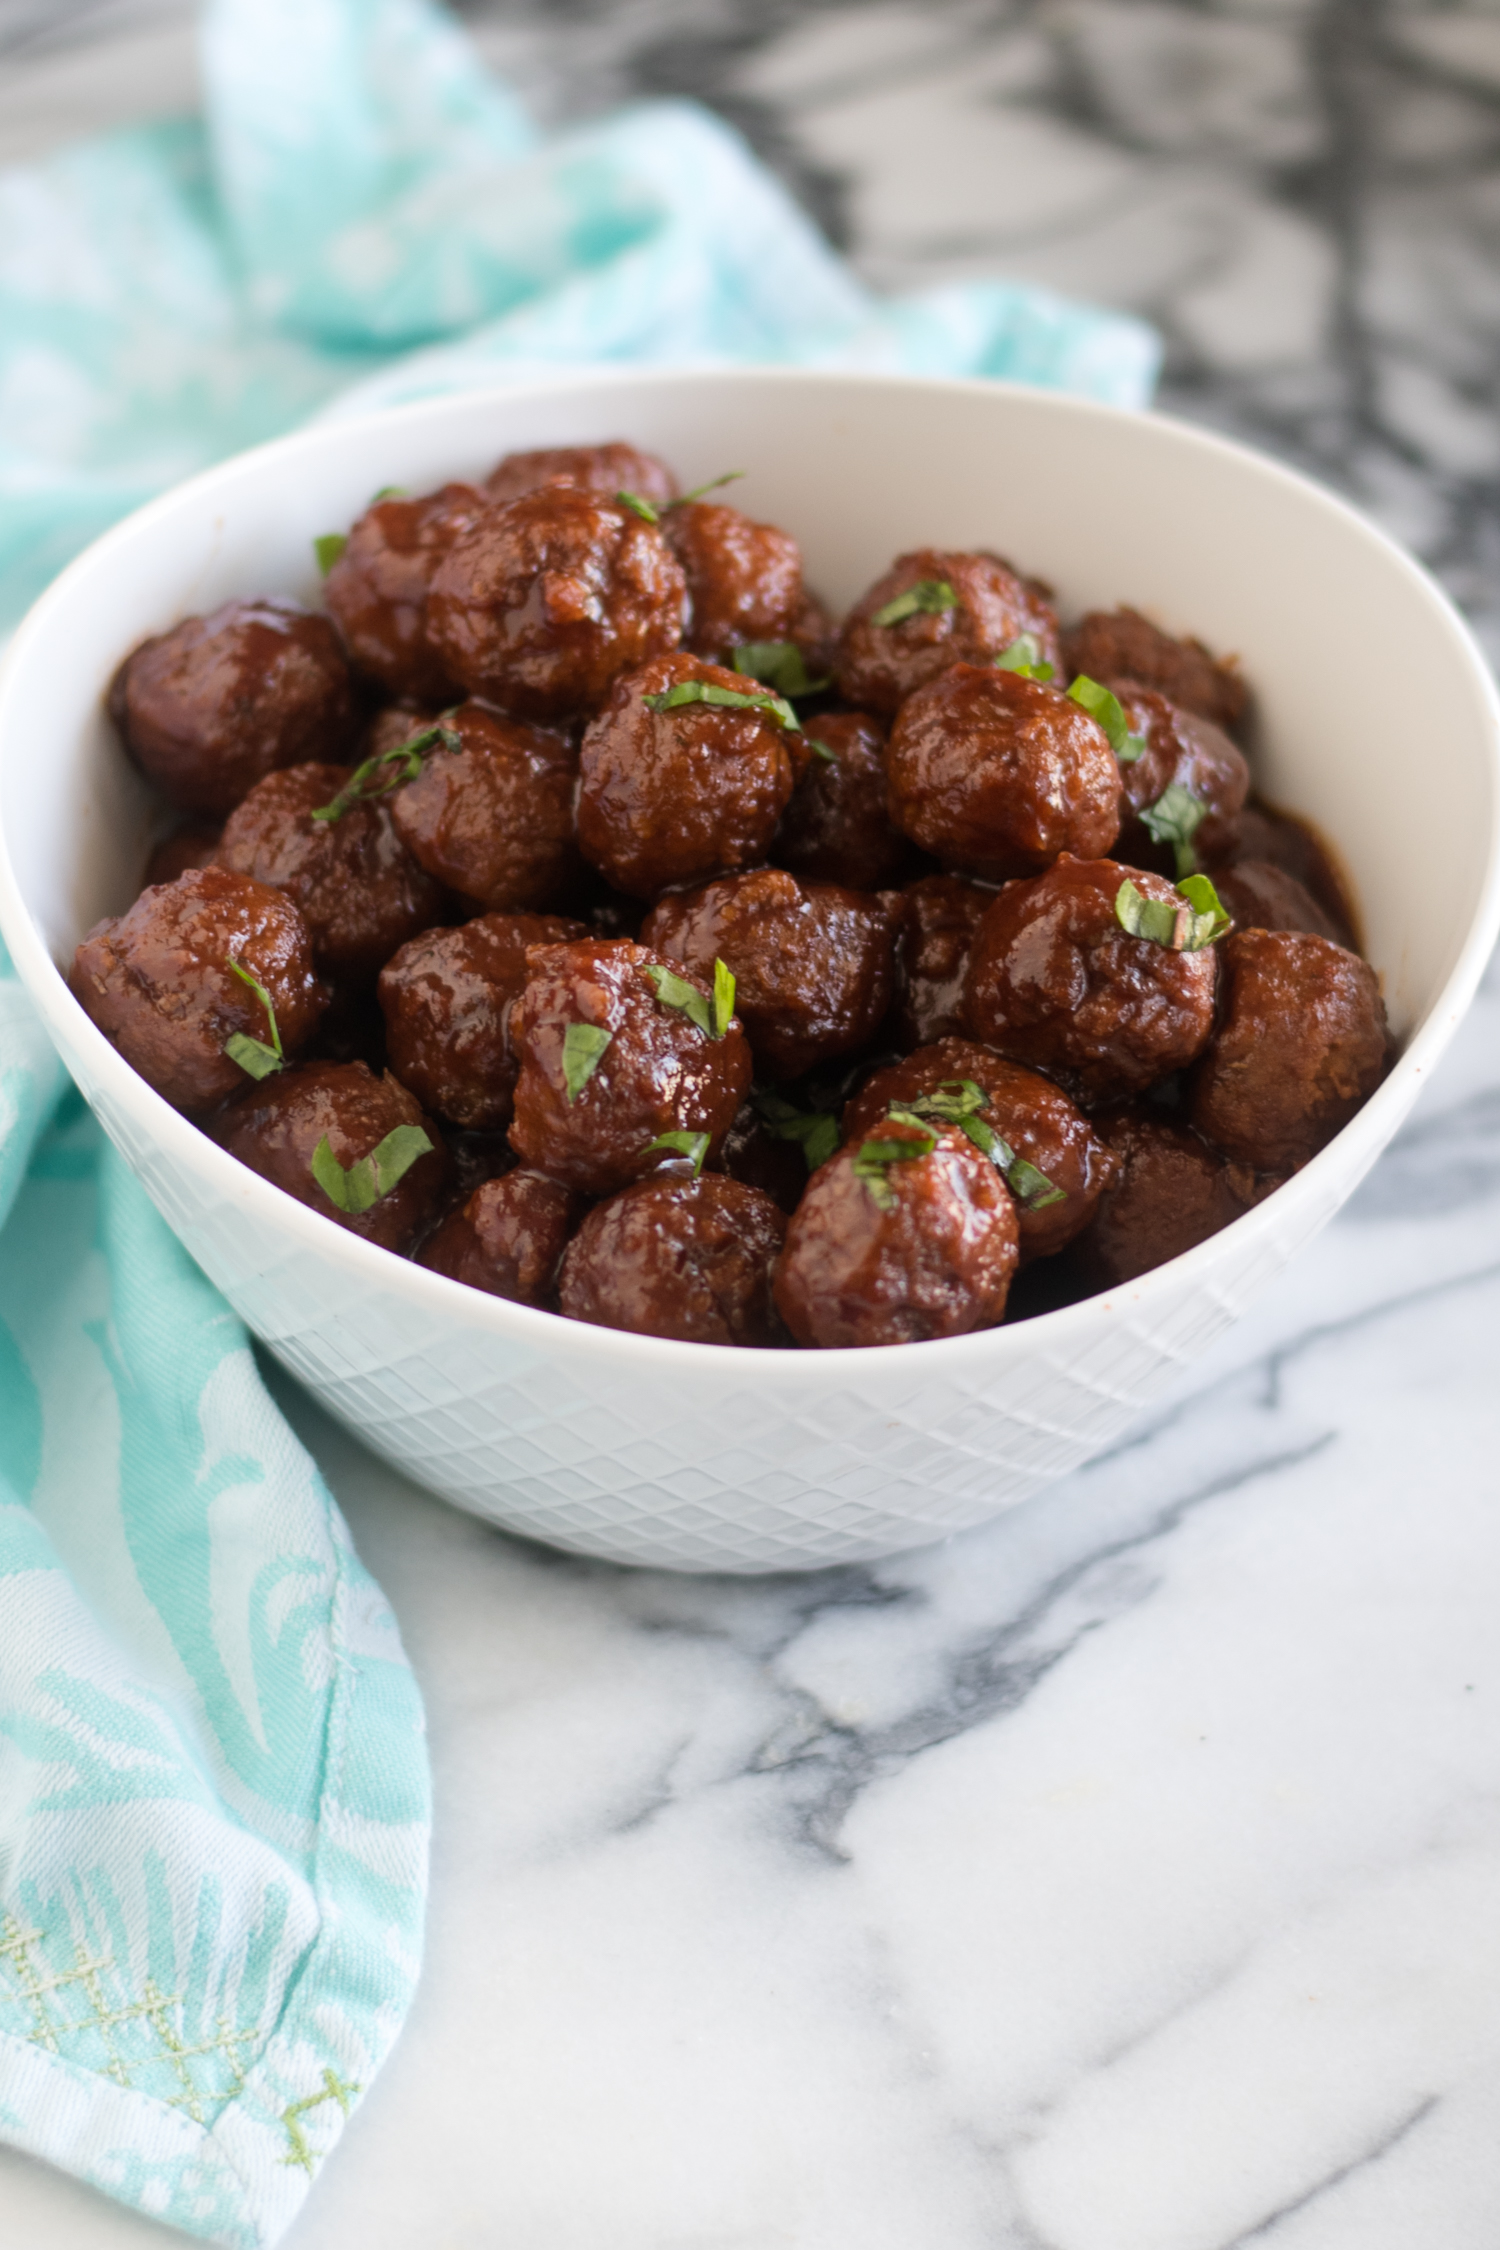 These  Slow Cooker Vegan Chili Sauce and Grape Jelly Meatballs would also be great served as a main course. For side dishes to serve with the meatballs, I love serving steamed rice or mashed potatoes. #vegan #holidays #Christmas #veganrecipes #vegetarian #slowcooker #crockpot 